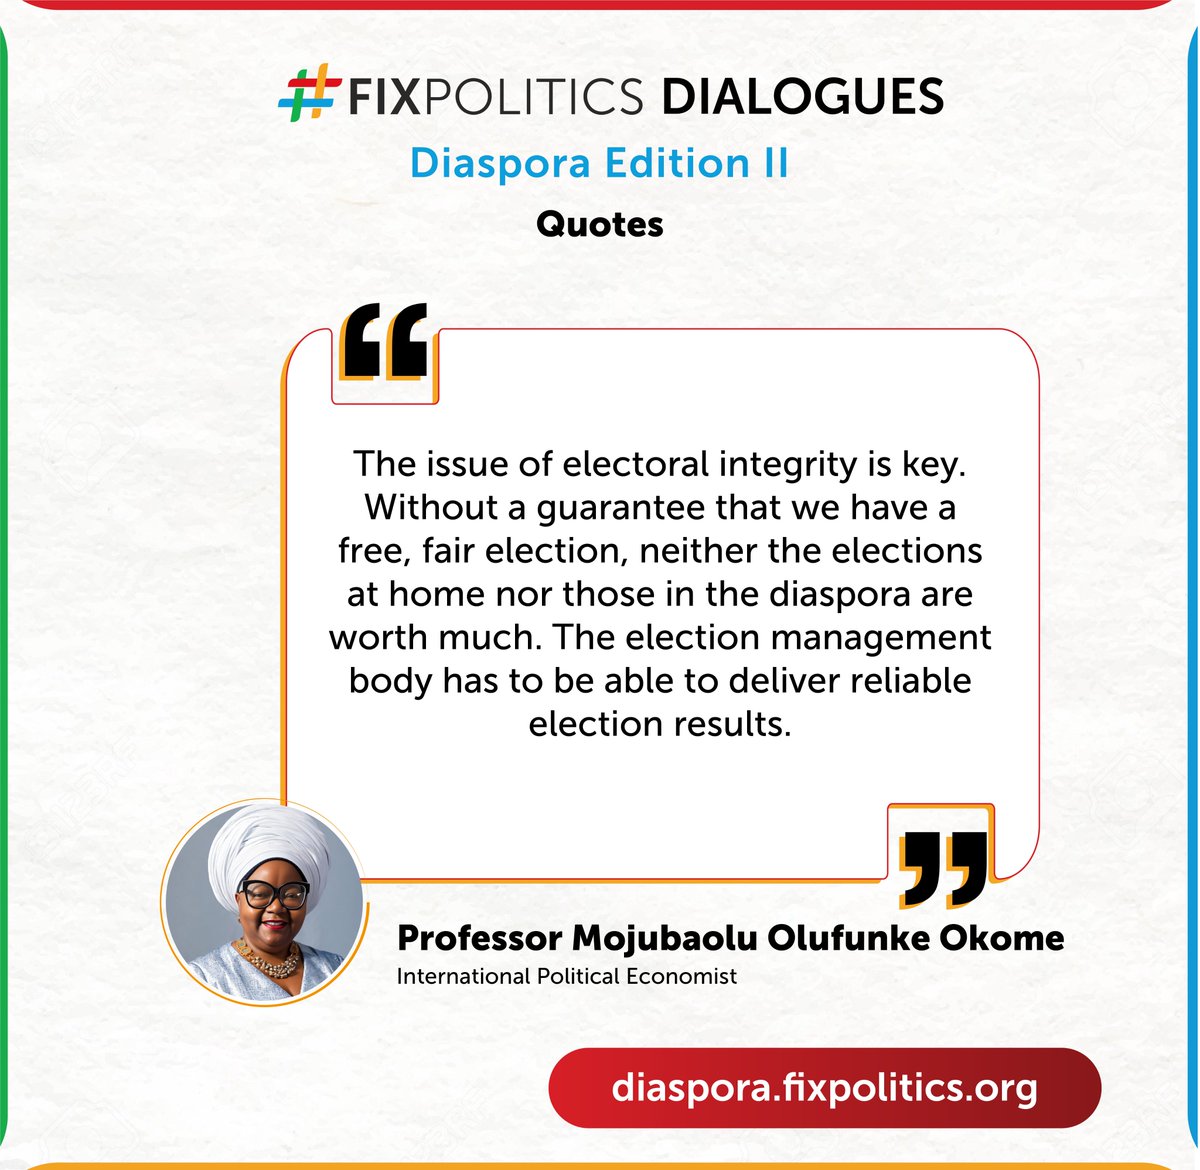 'Without a guarantee that we have a free and fair election, neither the elections at home nor those in the diaspora are worth much' - @mojubaolu at the #FixPolitics Diaspora Dialogue II. Watch this space for the next edition.